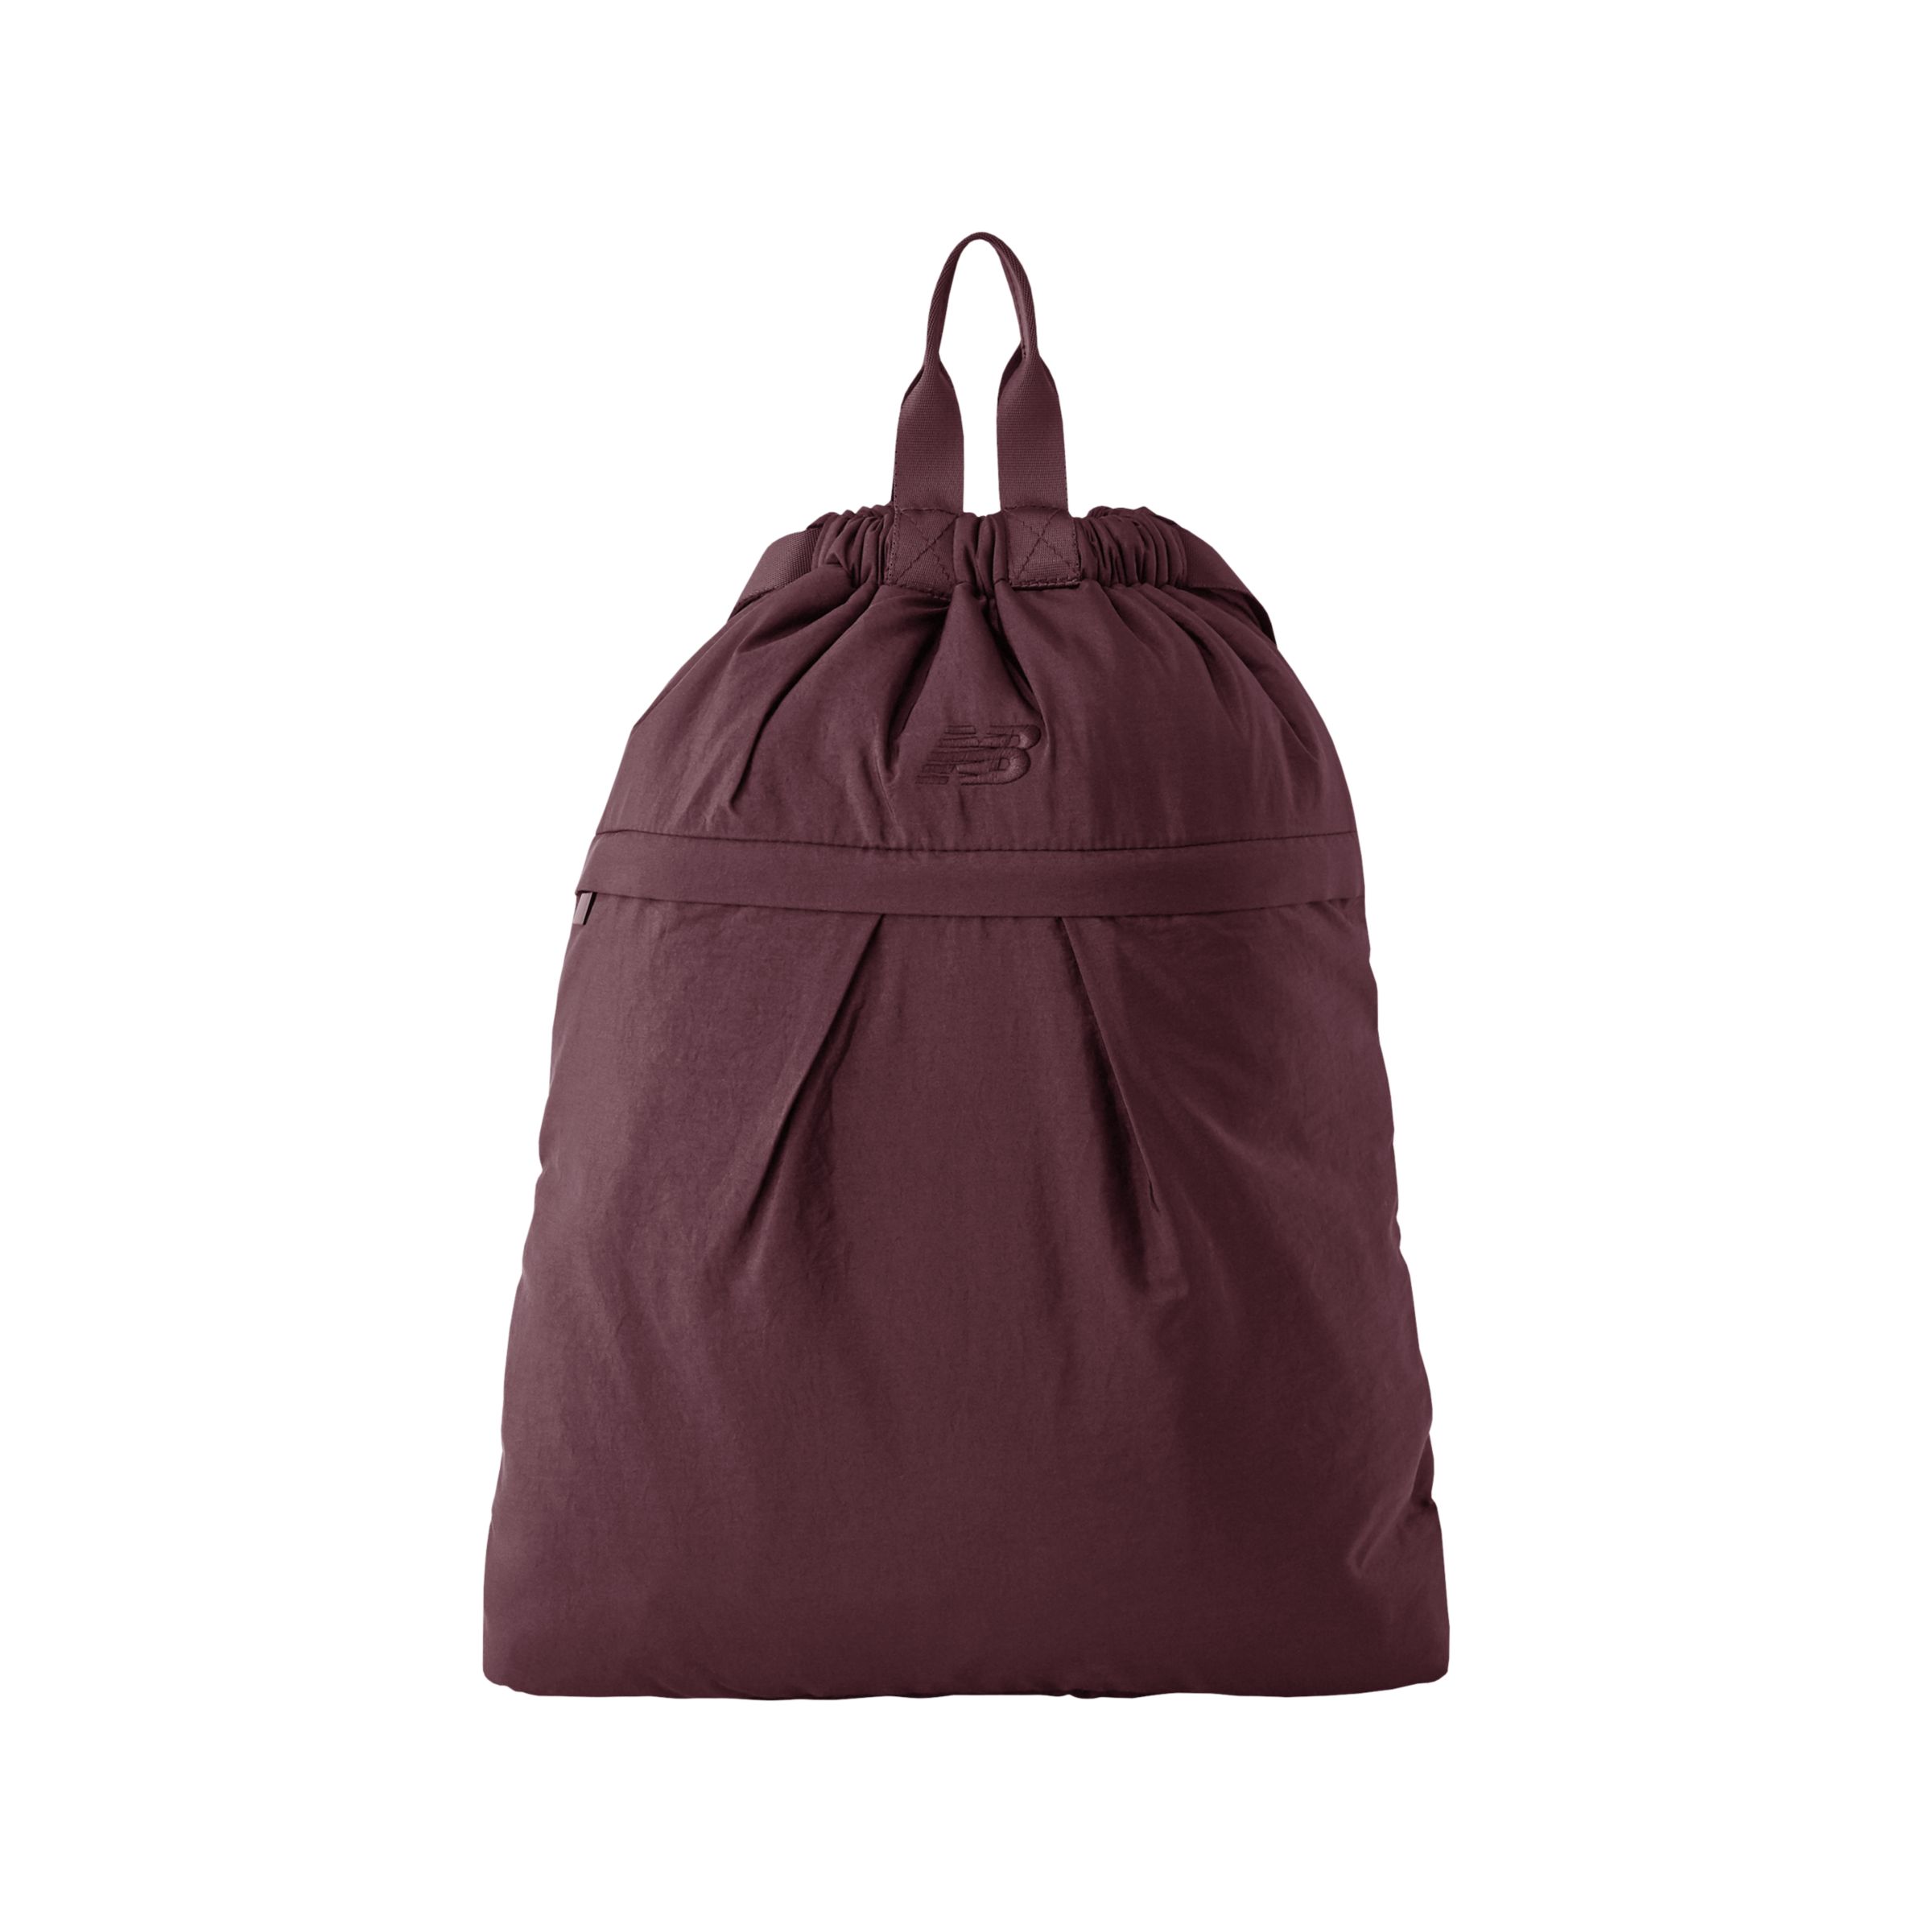 NEW BALANCE UNISEX WOMENS TOTE BACKPACK